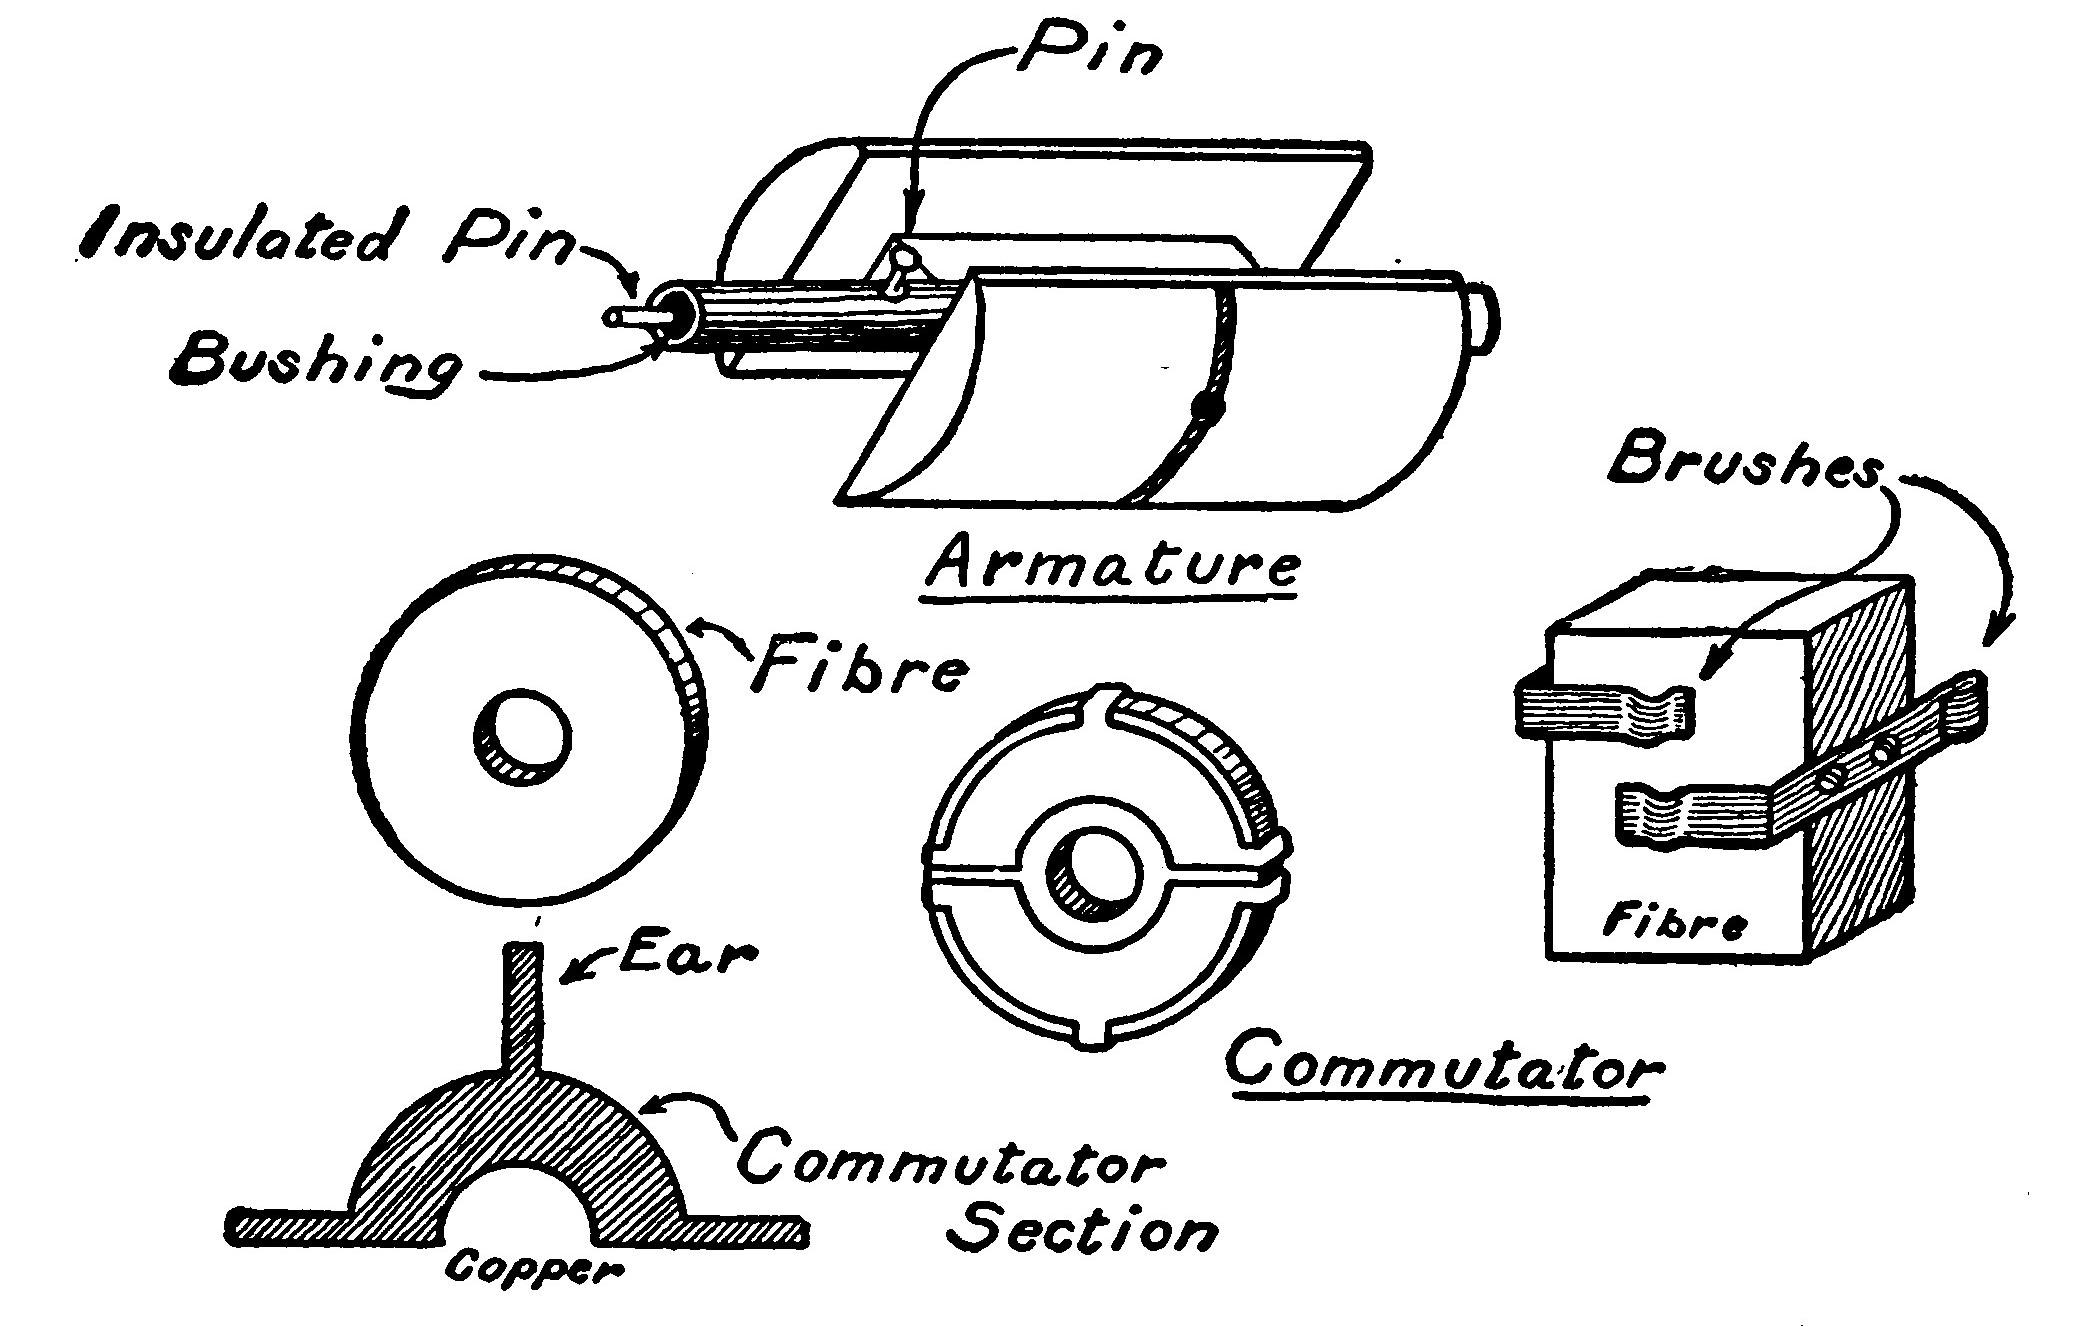 Fig. 253.—Details of the Armature, Commutator, and Brushes.